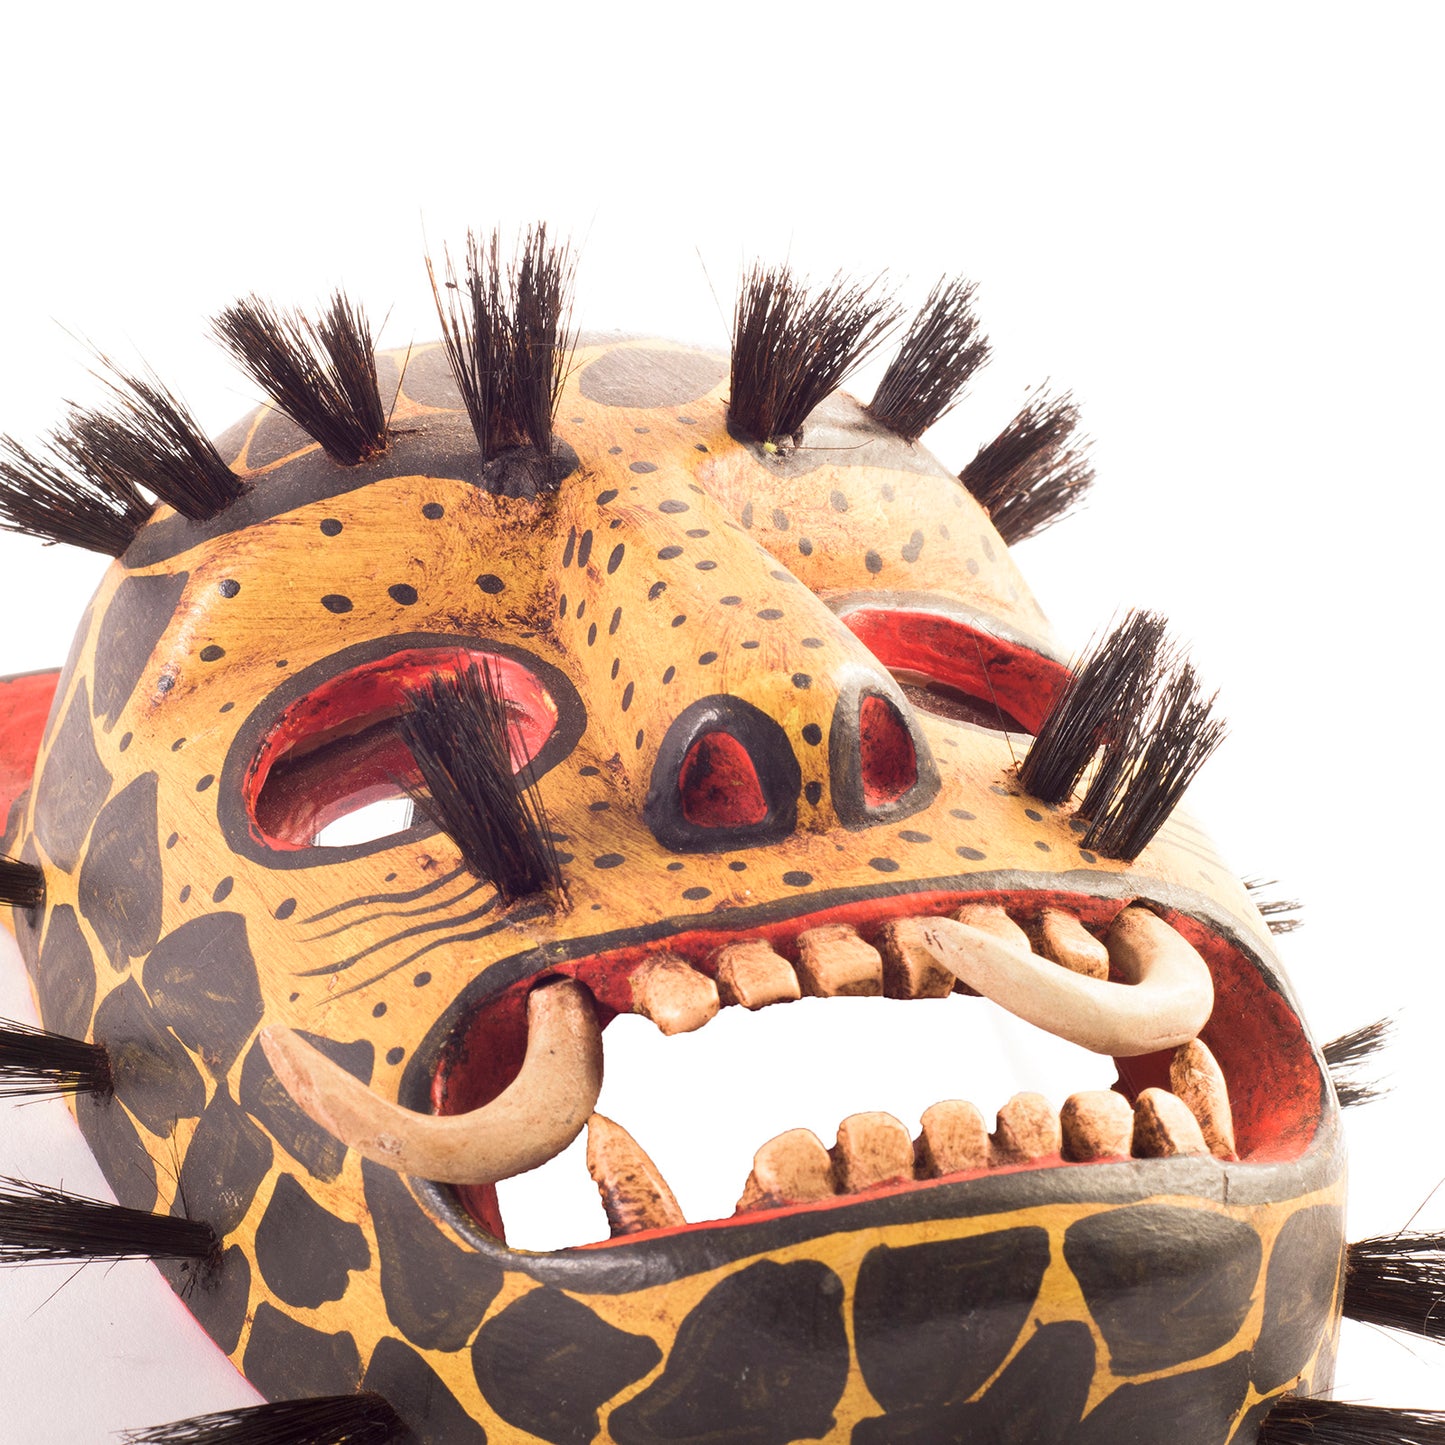 Handcarved Wooden Jaguar dance mask with mirrors